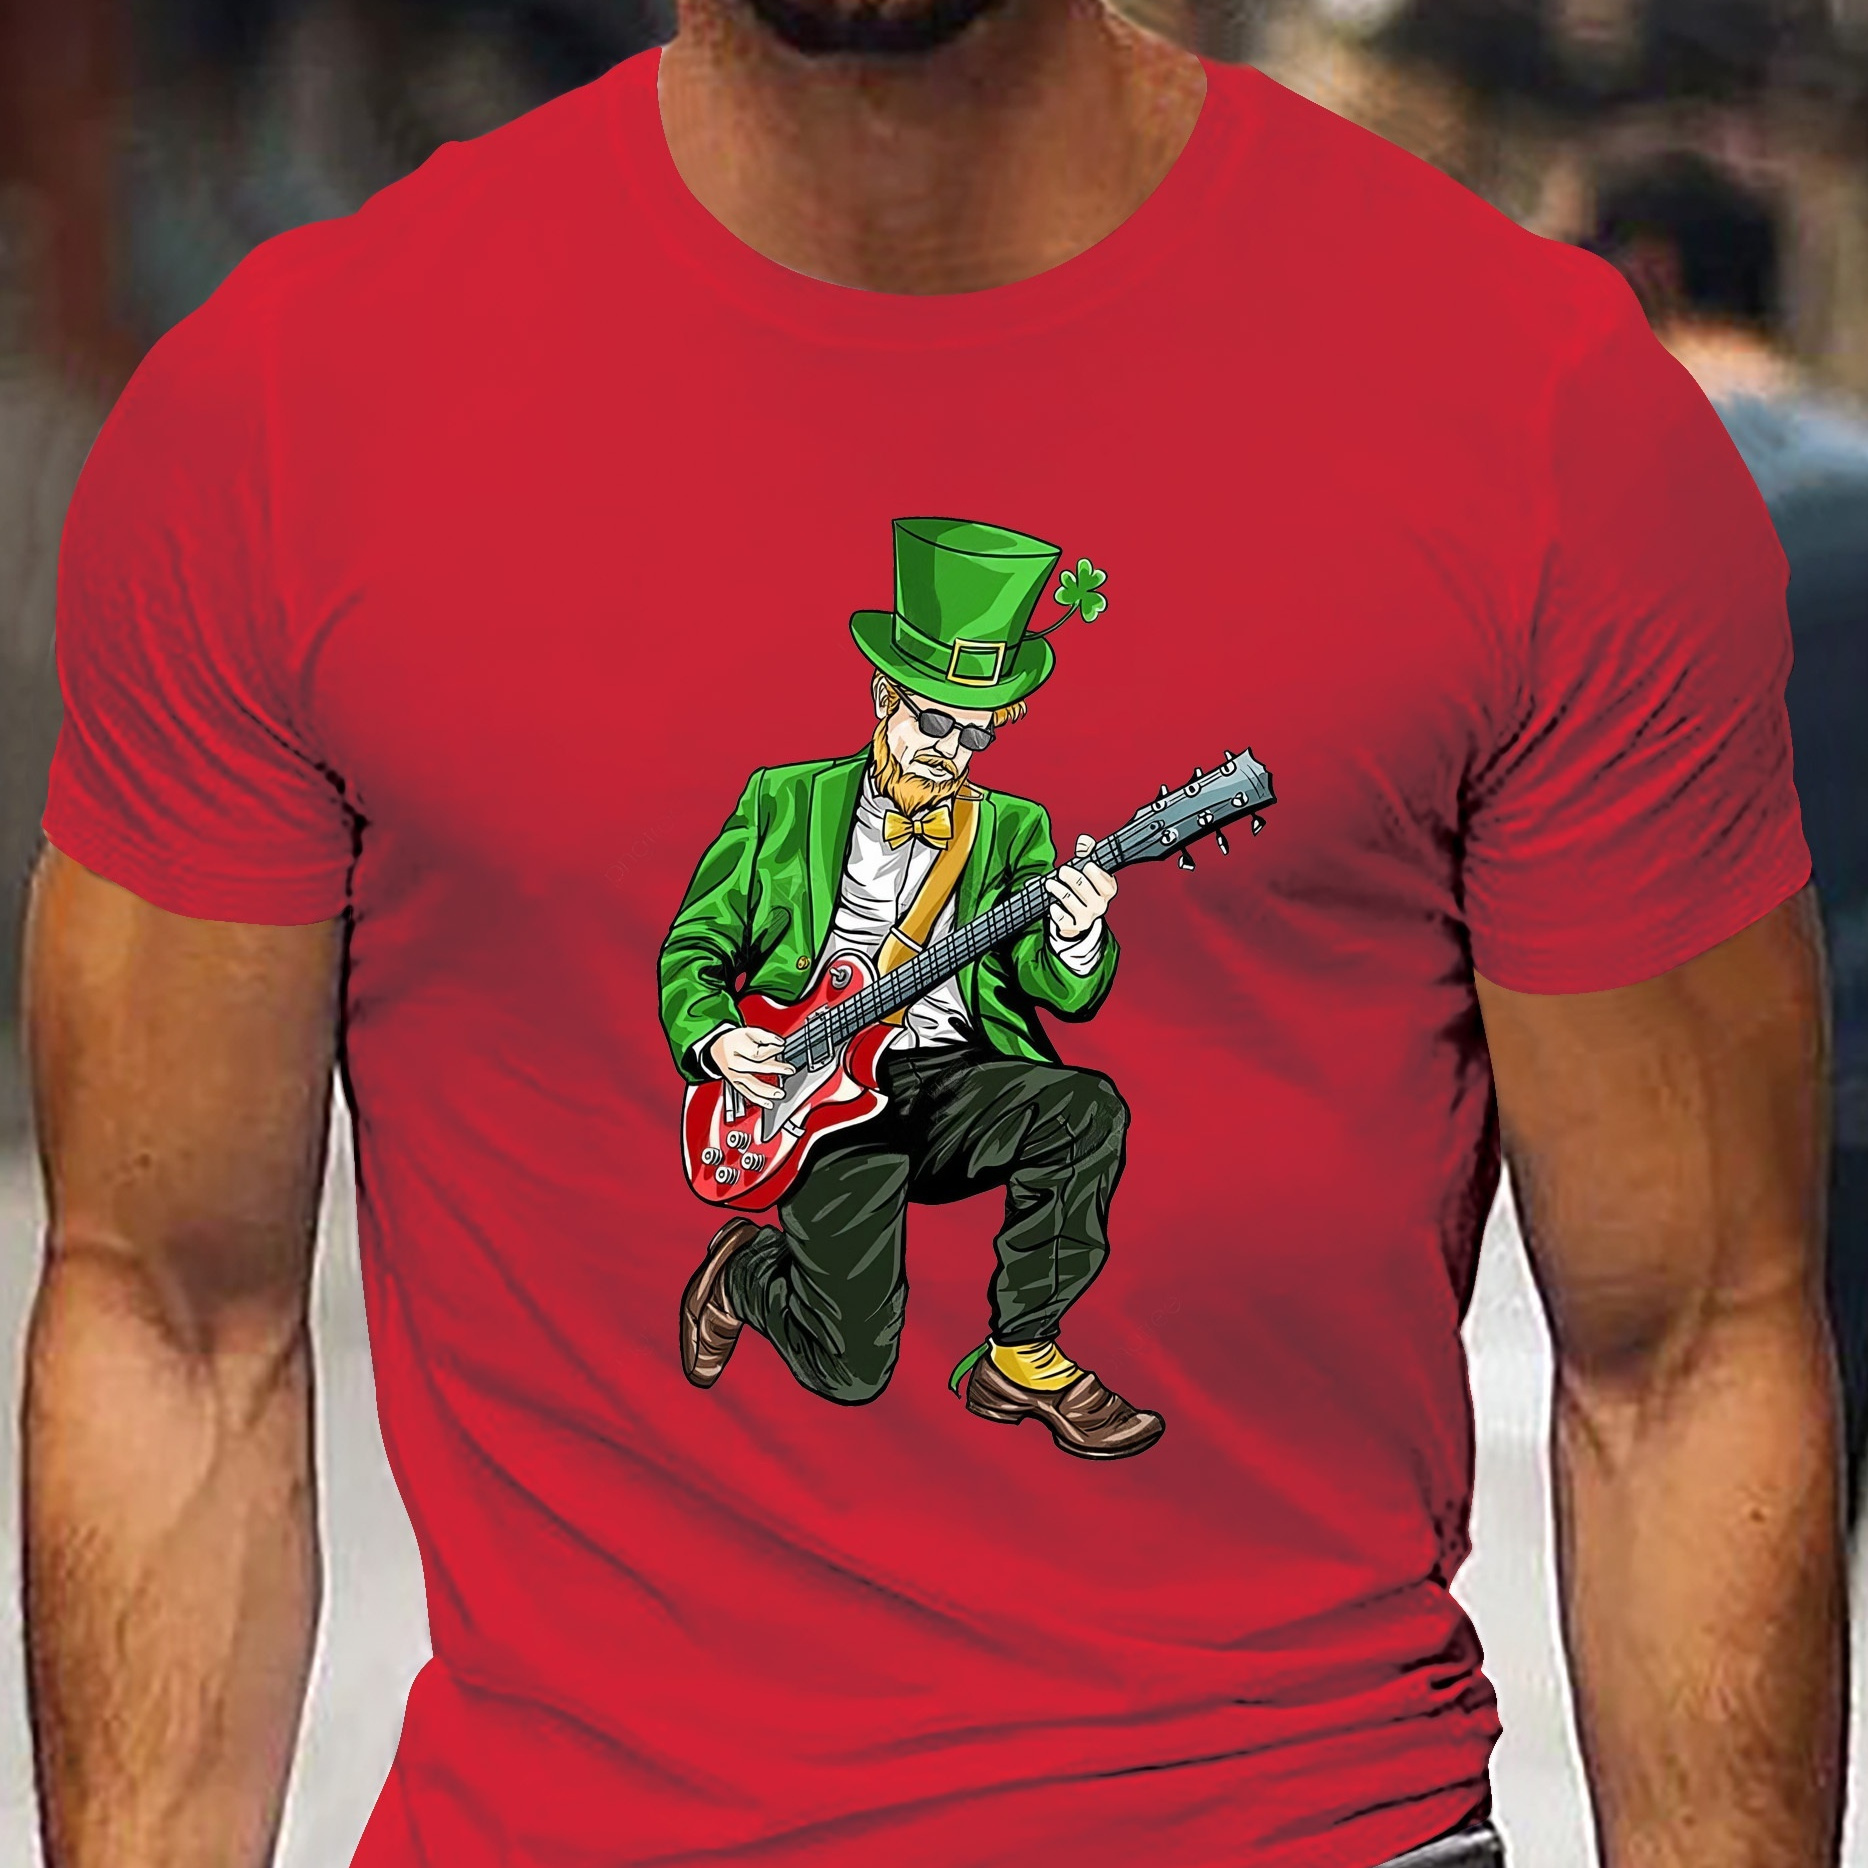 

St. Patrick's Day Theme Guitar Graphic Men's Short Sleeve T-shirt, Comfy Stretchy Trendy Tees For Summer, Casual Daily Style Fashion Clothing